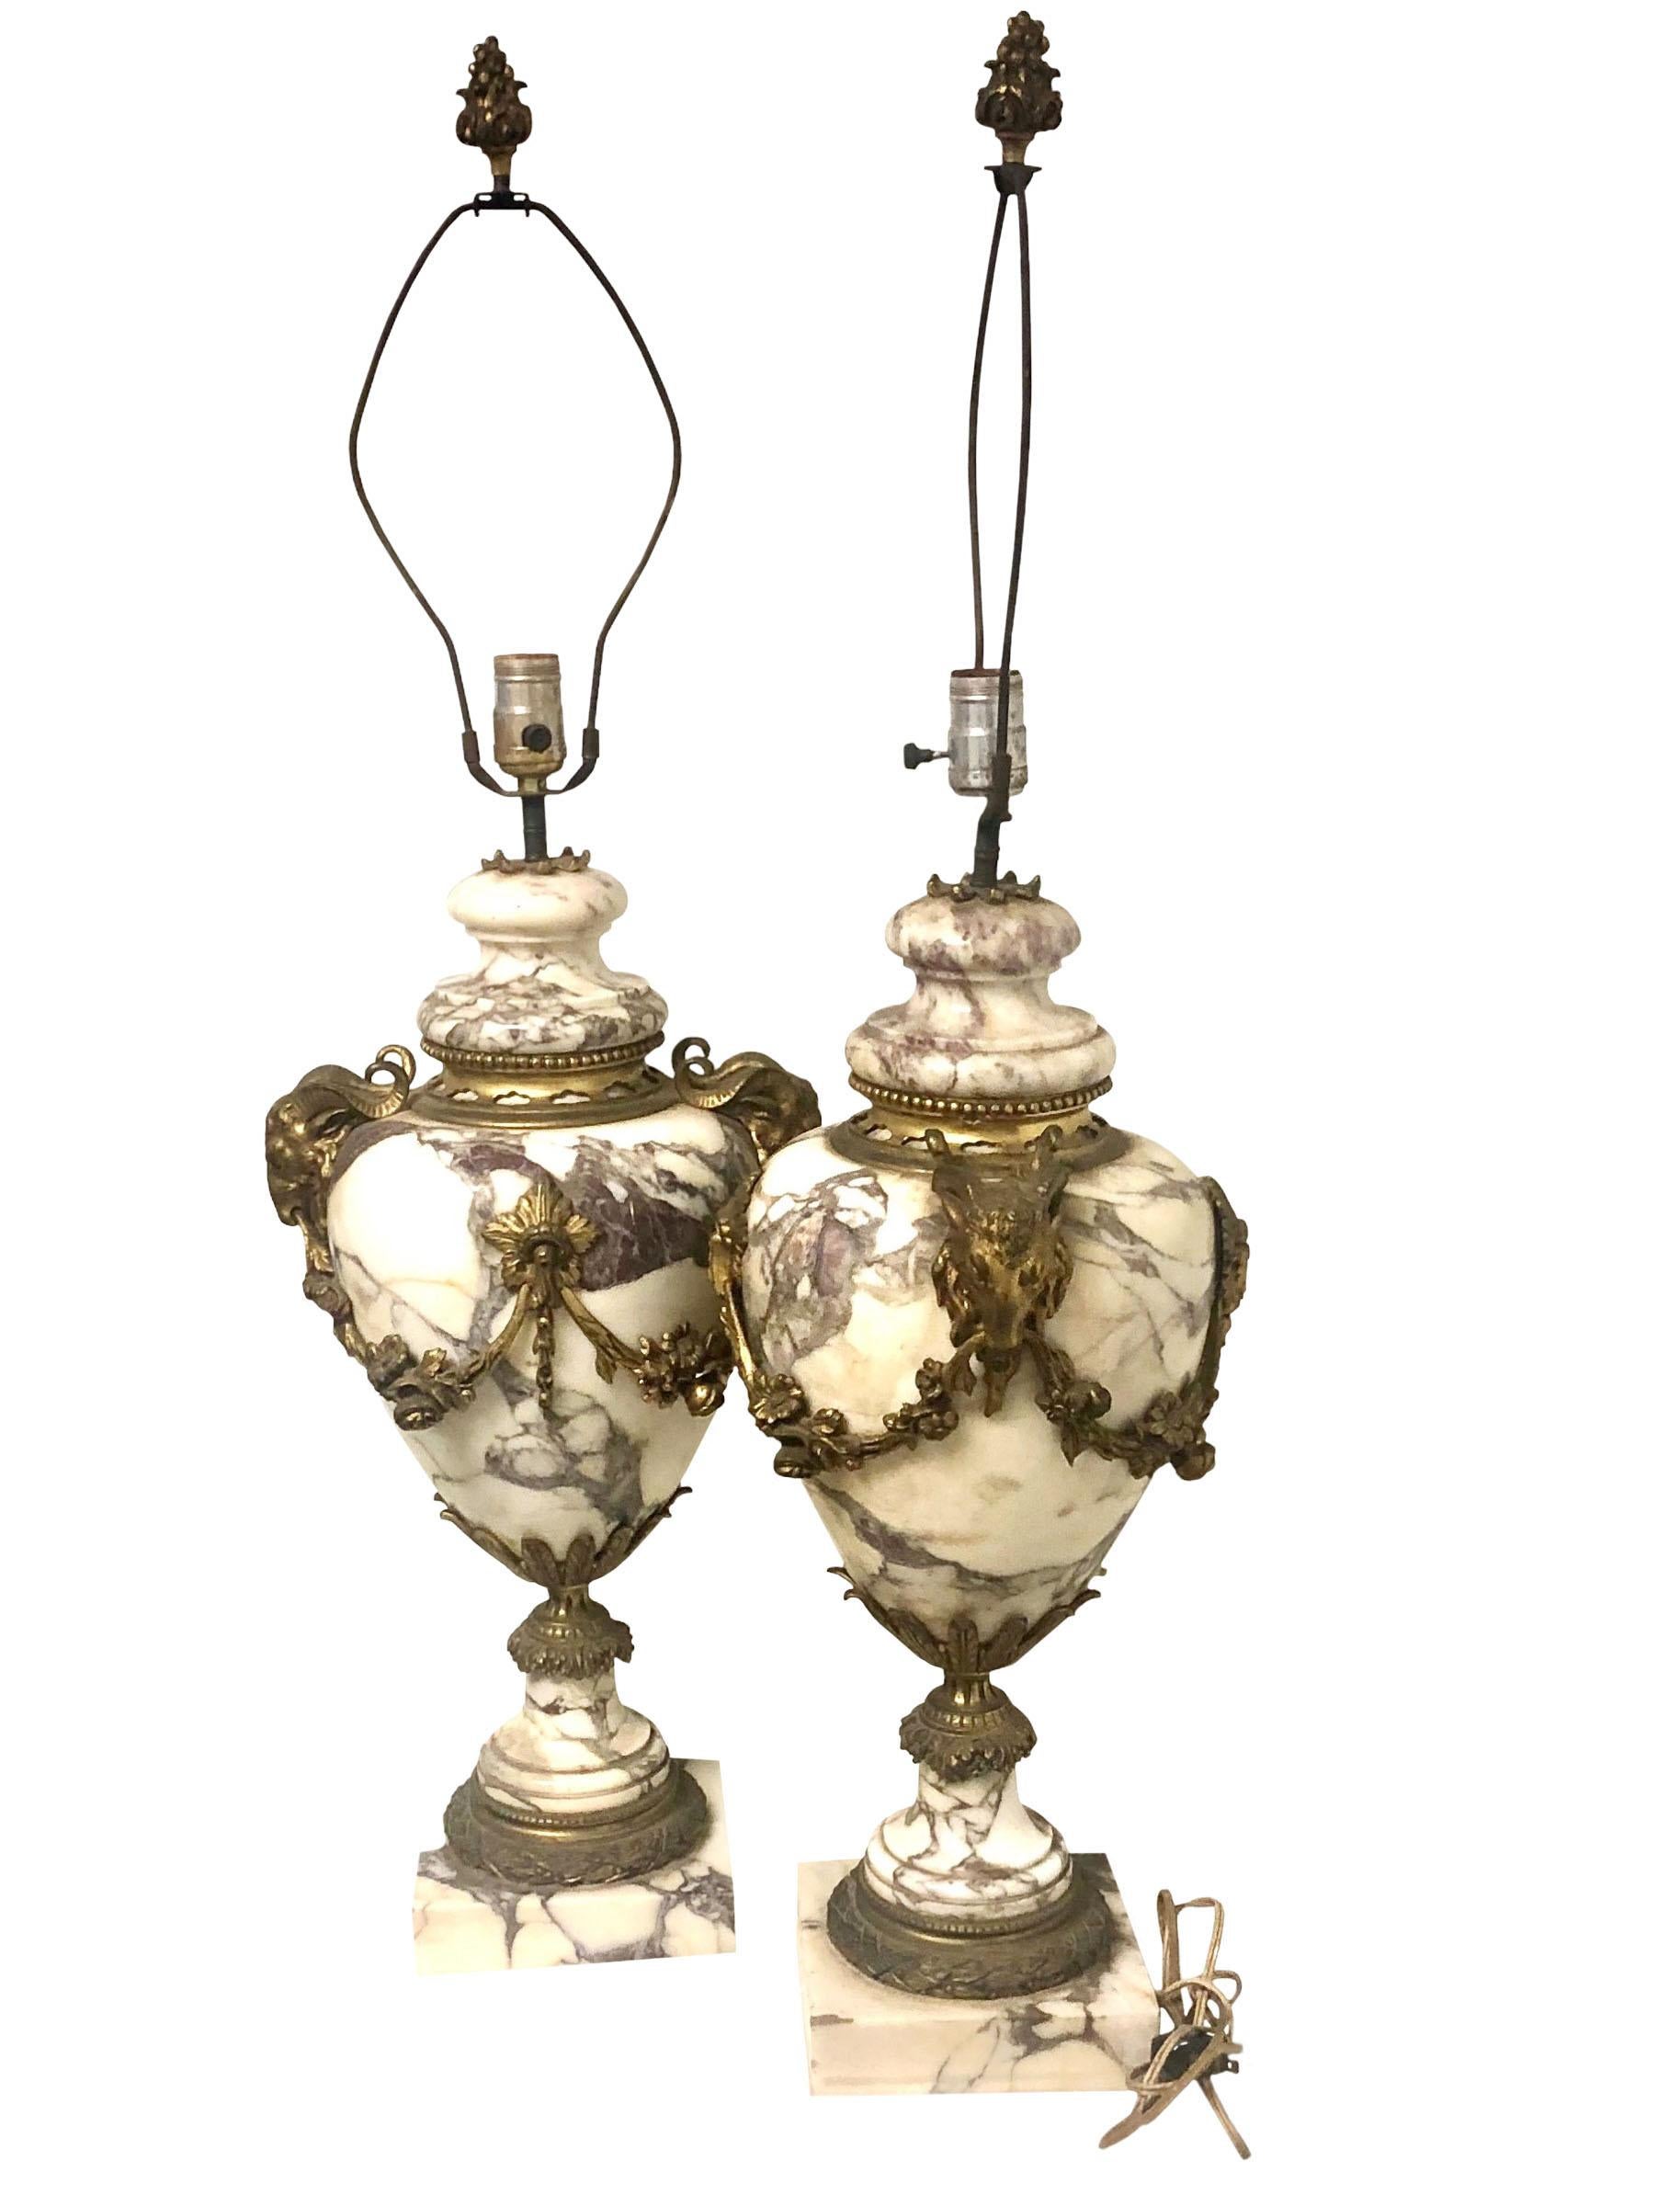 Very large pair of French dore bronze and marble castellettes converted into lamps. Cord and socket are in good condition maybe from the 60s the castellettes are late 19th century and the finials on harp are original to the castellettes. They just